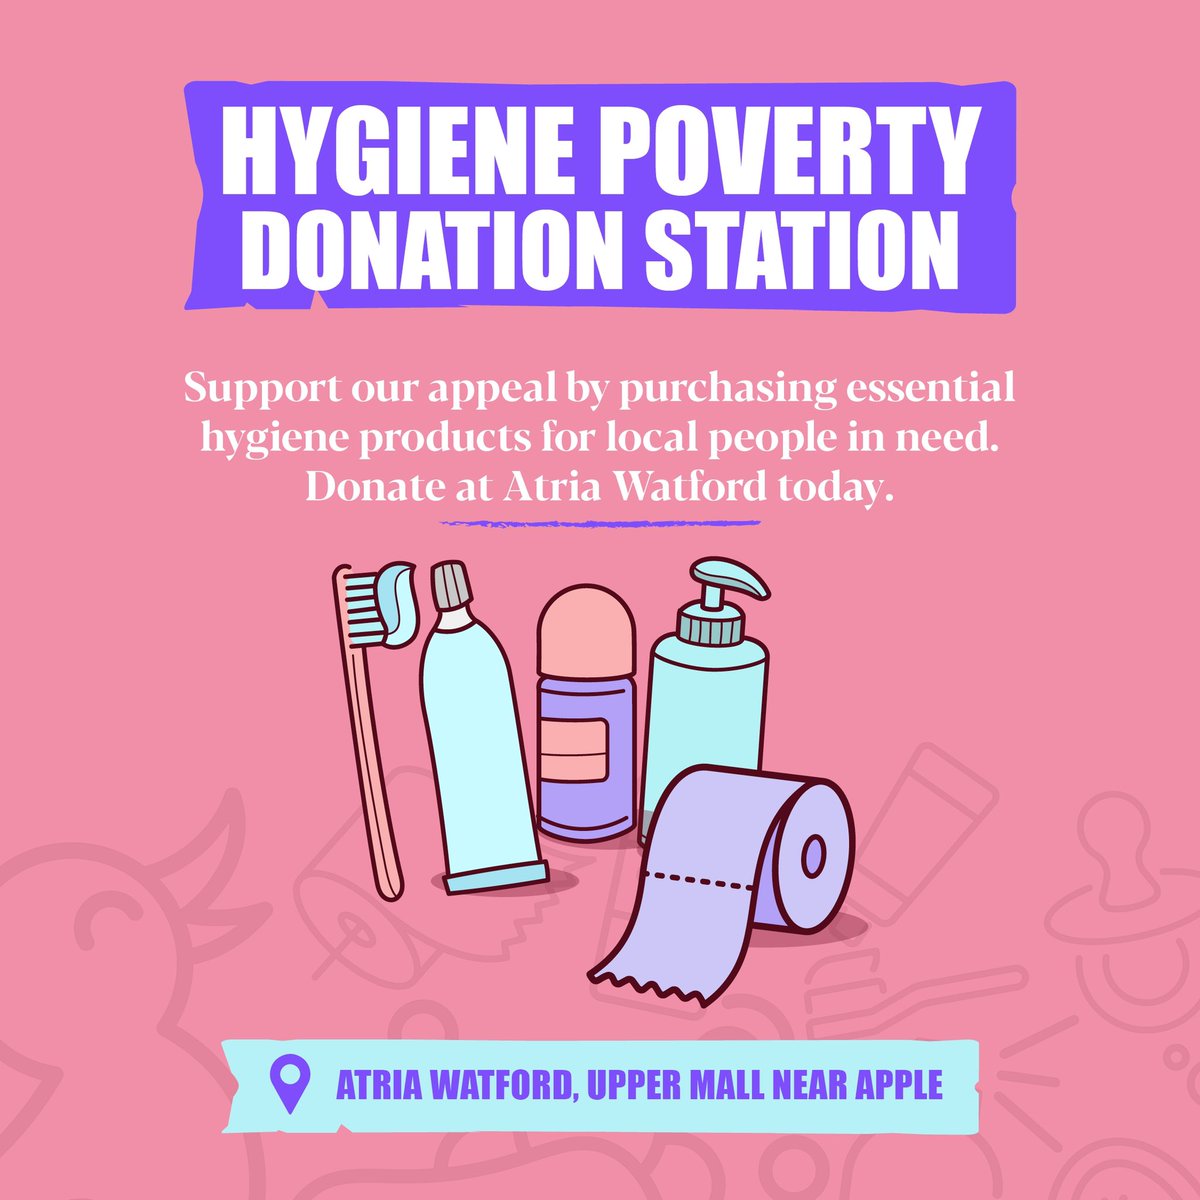 🚿 Hygiene Poverty Donation Station - A great initiative introduced by @atriaWatford 🧴 Drop off your donations on the upper mall of their shopping centre 🔗 atriawatford.com/news/hygiene-p…